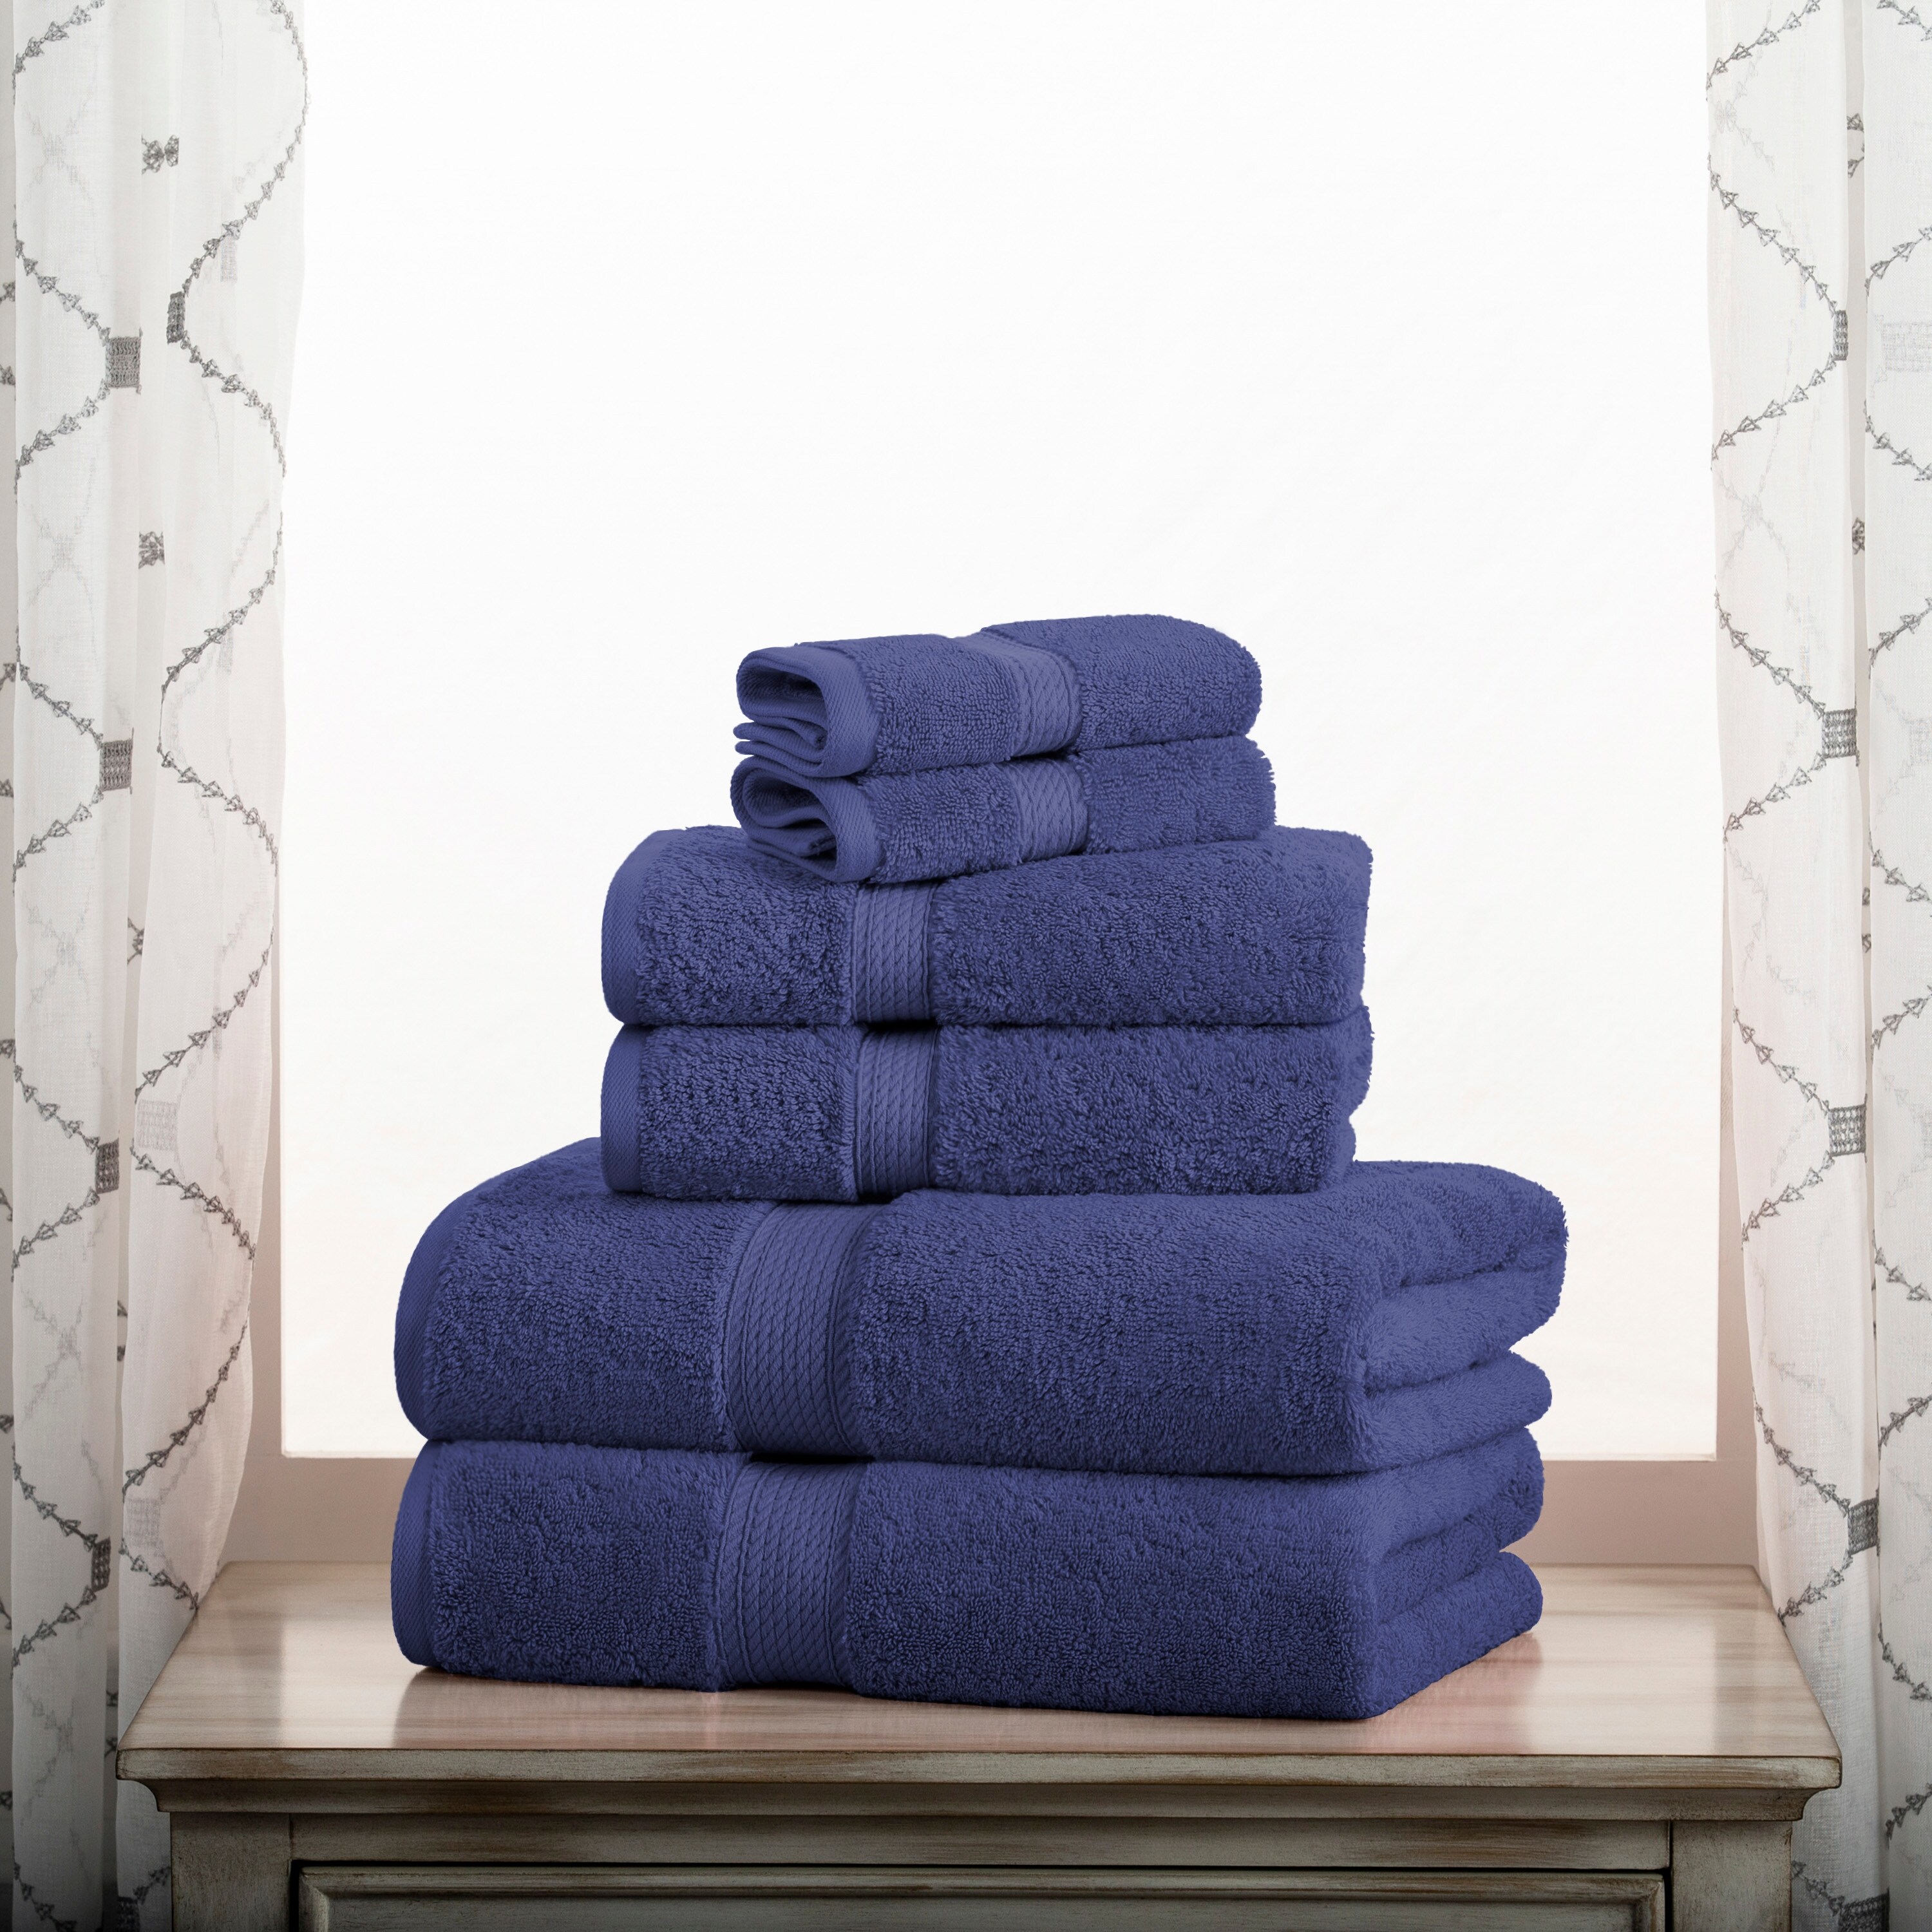 https://ak1.ostkcdn.com/images/products/is/images/direct/db20a41b1a453357fd230971f9377327815526c4/Egyptian-Cotton-Heavyweight-Solid-Plush-Towel-Set-by-Superior.jpg